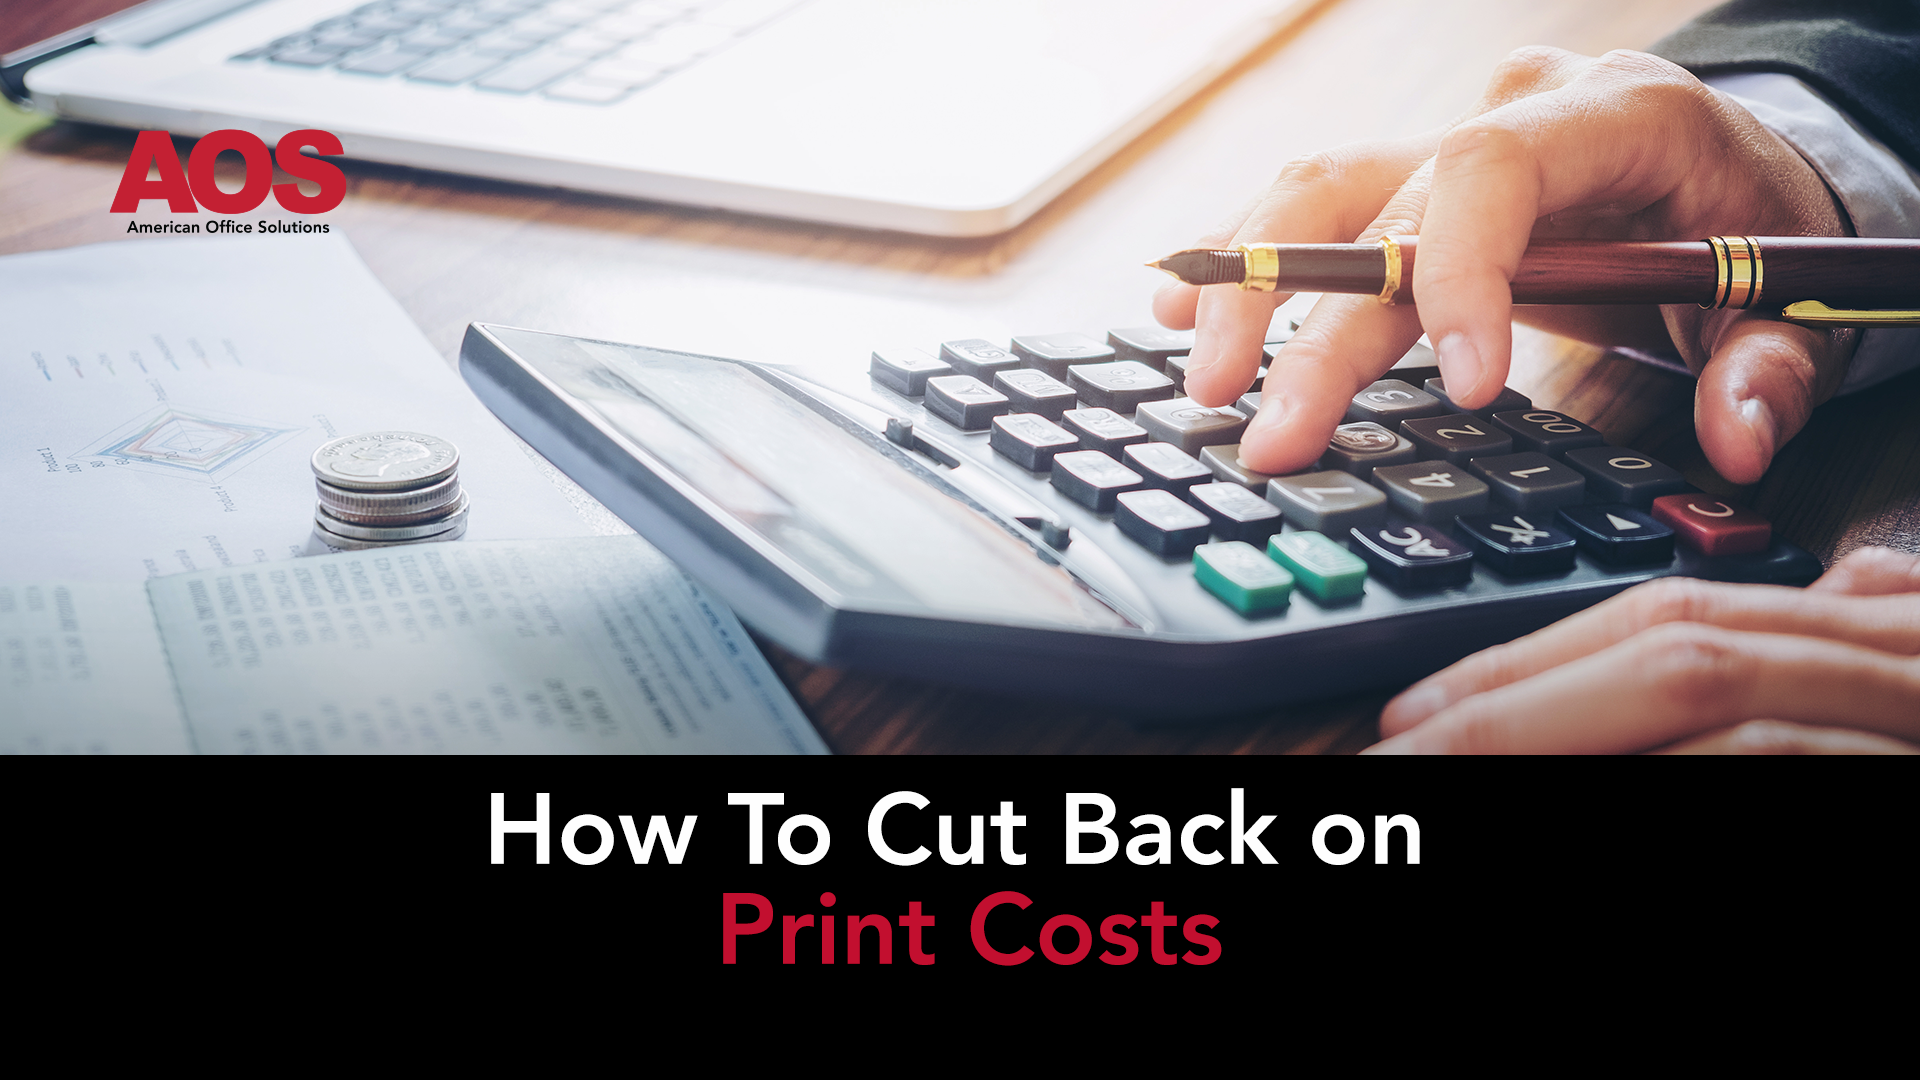 How to cut back on print costs